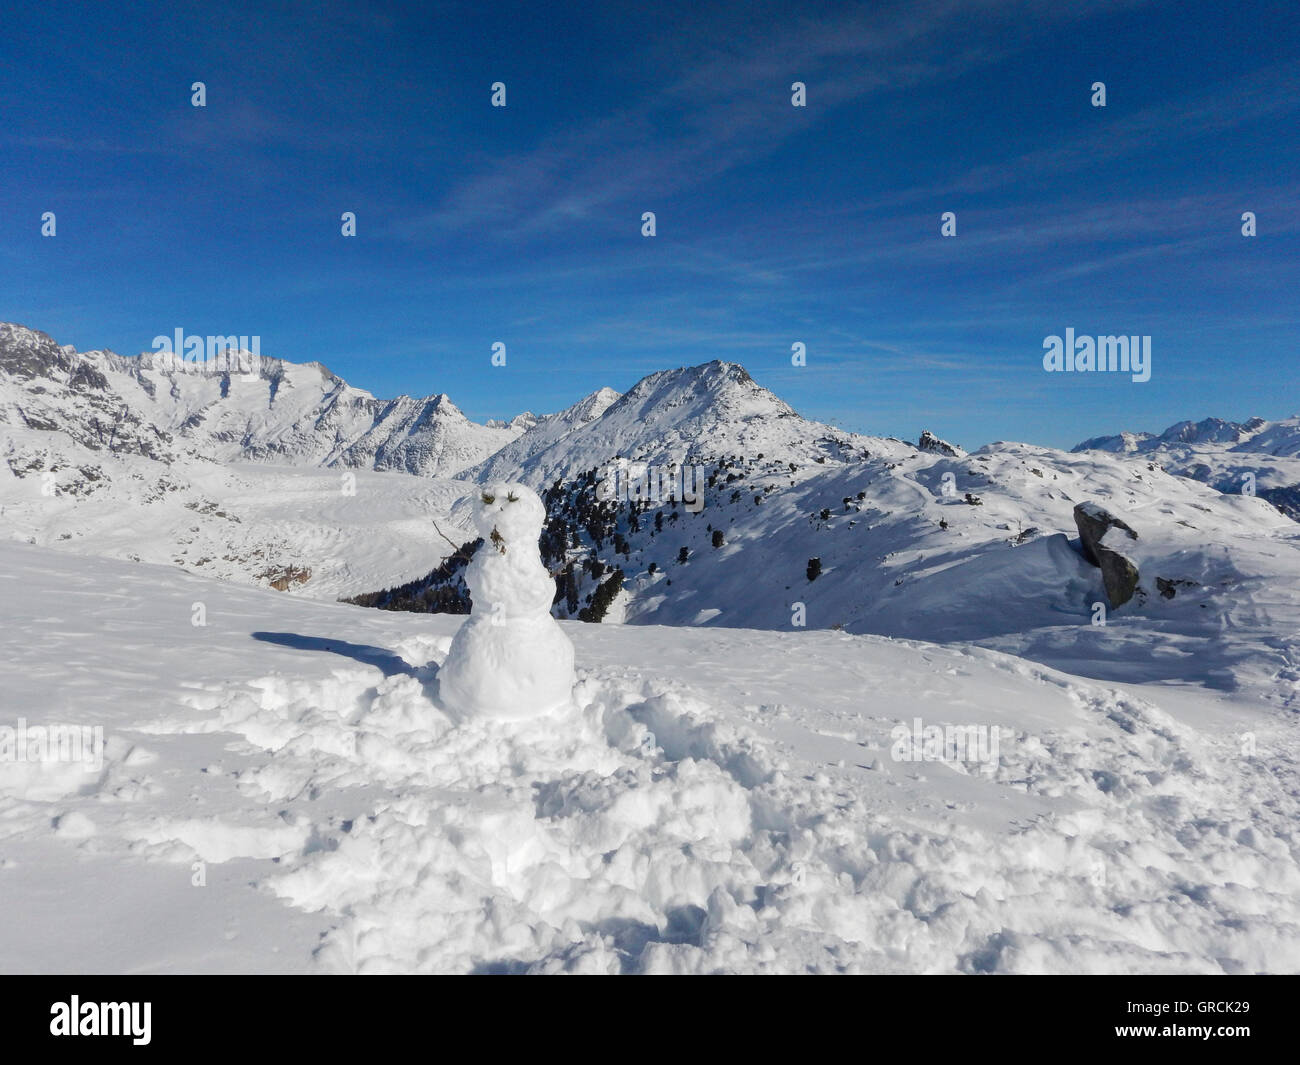 Snowman With Bettmerhorn And The Great Aletsch Glacier In The Background, On A Sunny Day In Winter With Deep Blue Sky And Snowcovered Mountains Stock Photo